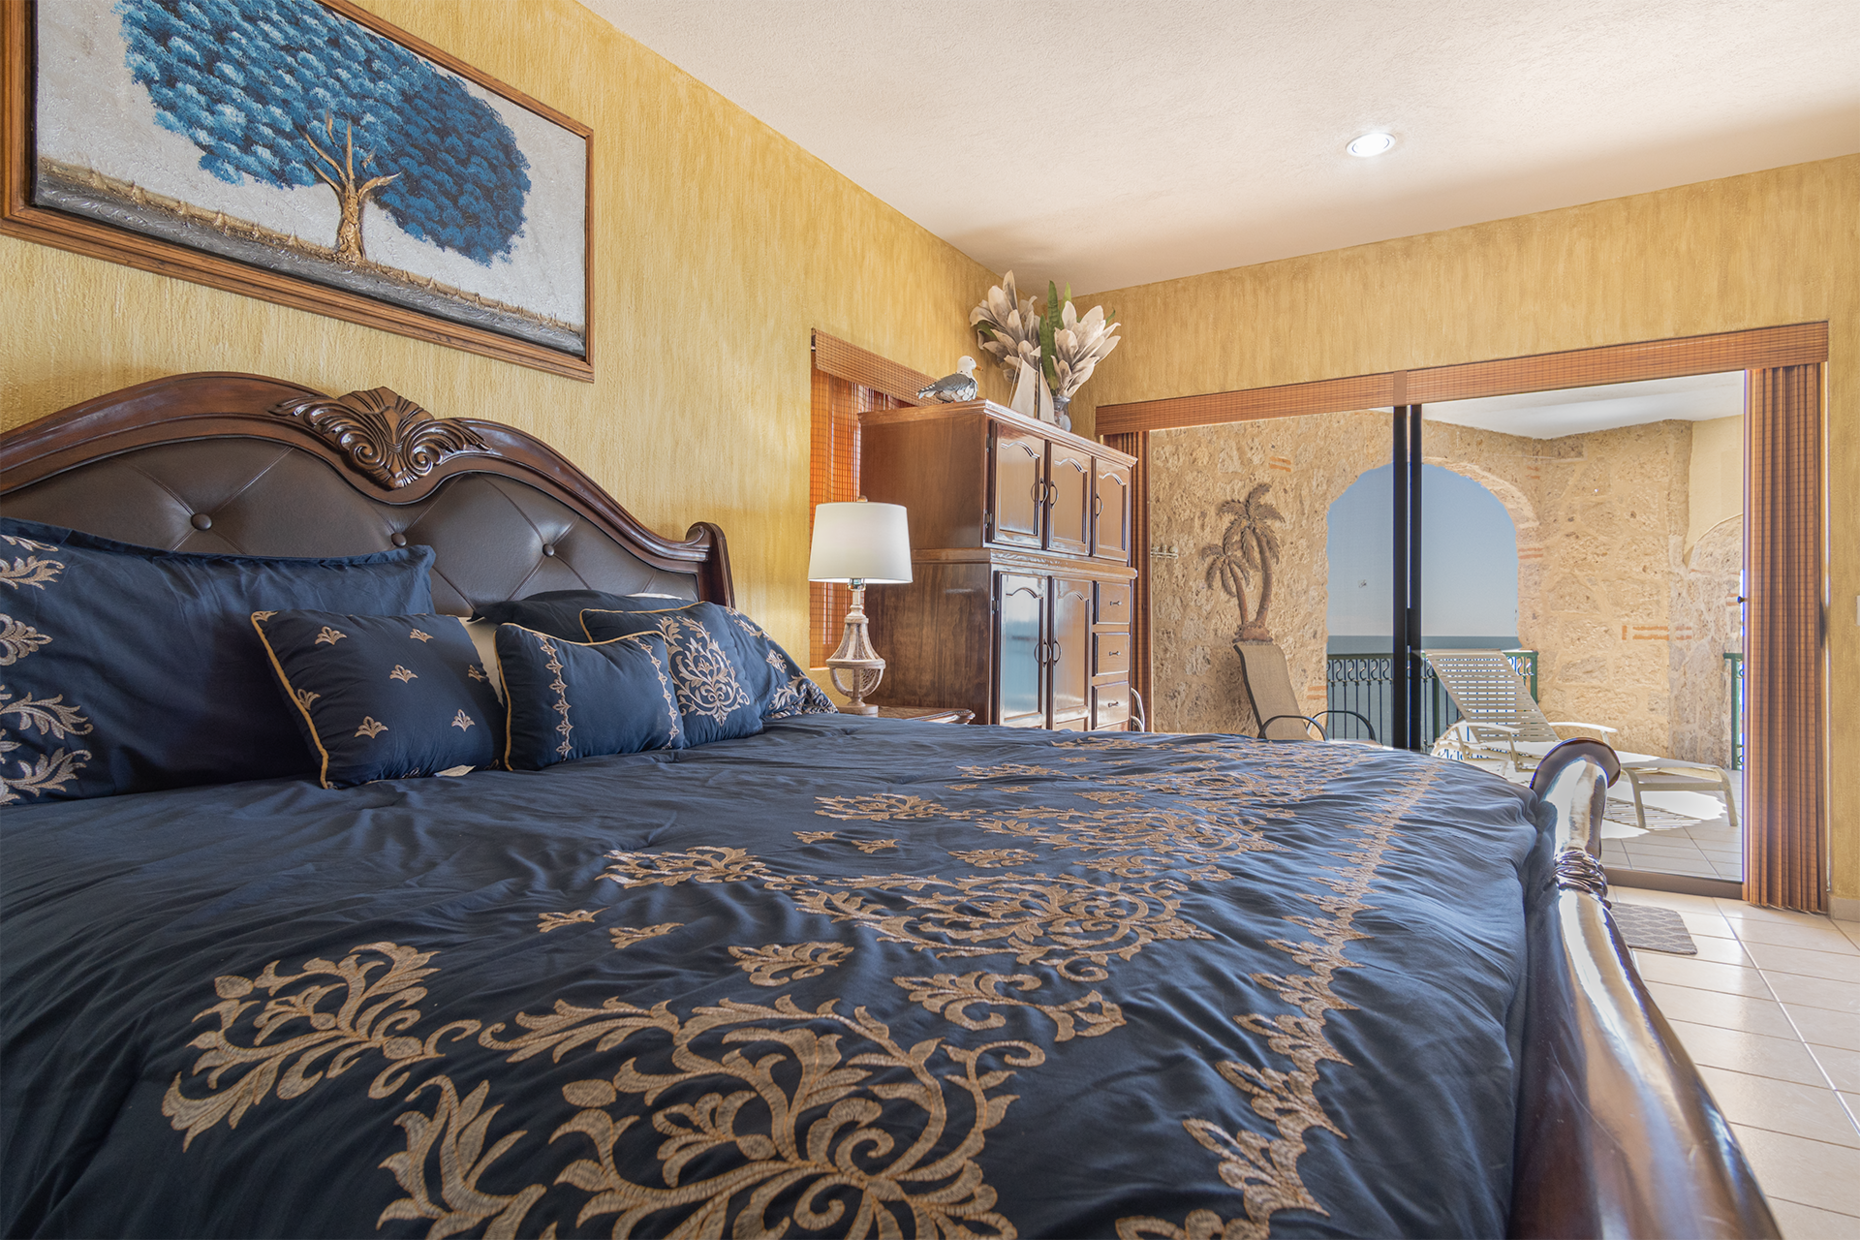 The main bedroom is beachside, with sliding door access to the patio.